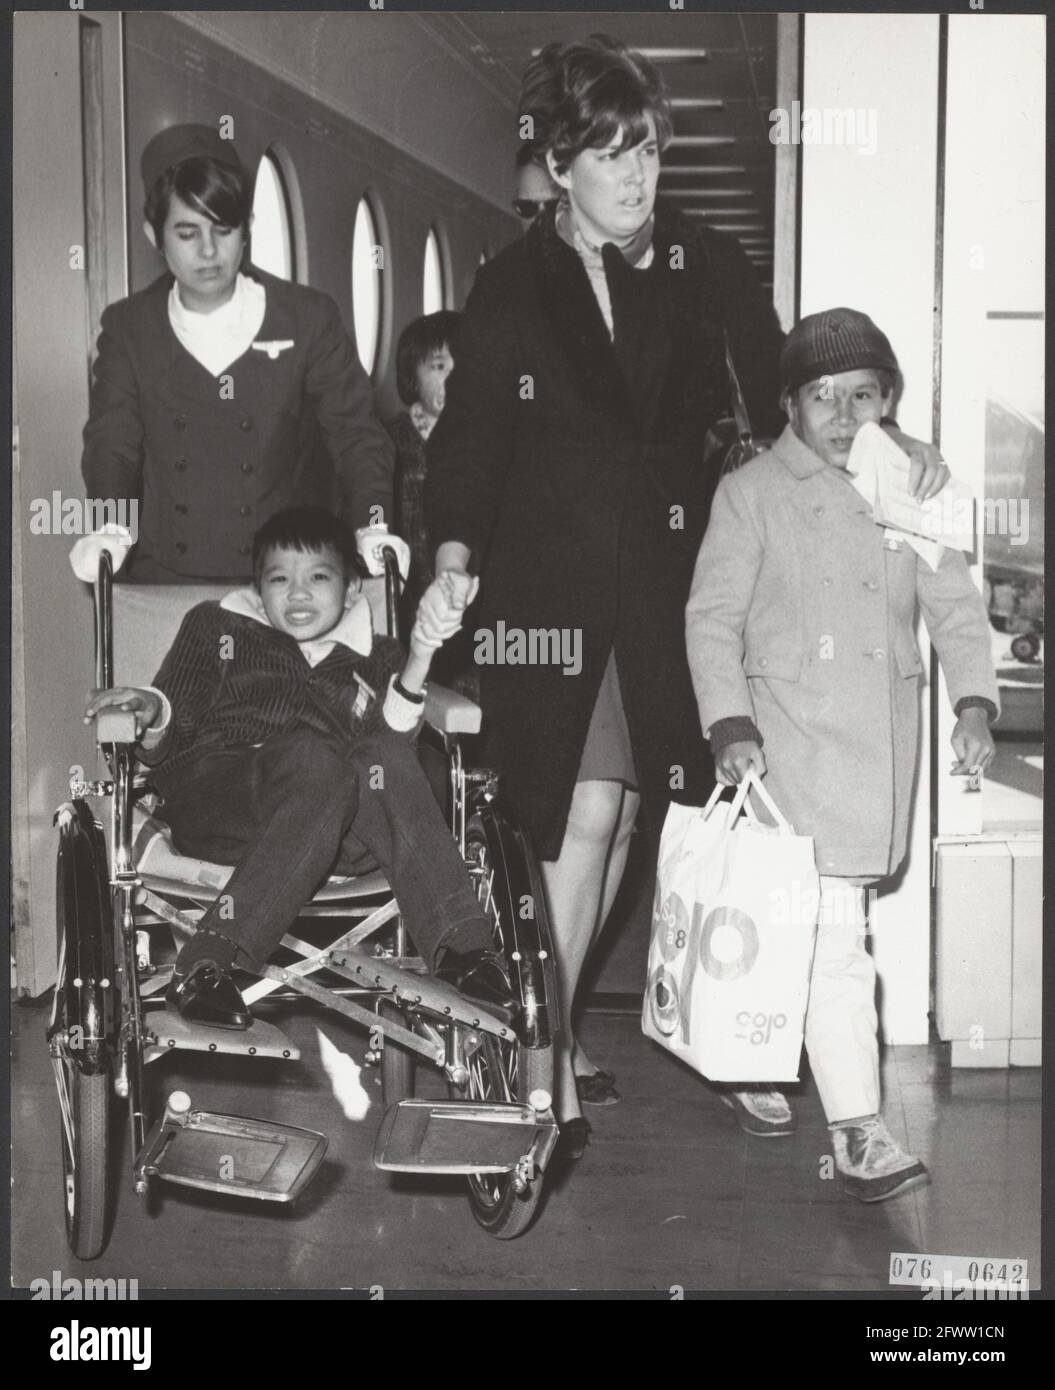 Three more children arrived at Schiphol Airport from Vietnam who had been seriously injured by the war there. The children, two girls and a boy, were brought to the Netherlands by the Terre des Hommes foundation. For the time being they are going to a clinic in Huizen (N.H.). Two of the three children at arrival at Schiphol Airport, in the chair the boy (injured by mine explosion) and on the right a girl (burns), February 27, 1968, wounded, health care, children, airports, The Netherlands, 20th century press agency photo, news to remember, documentary, historic photography 1945-1990, visual Stock Photo